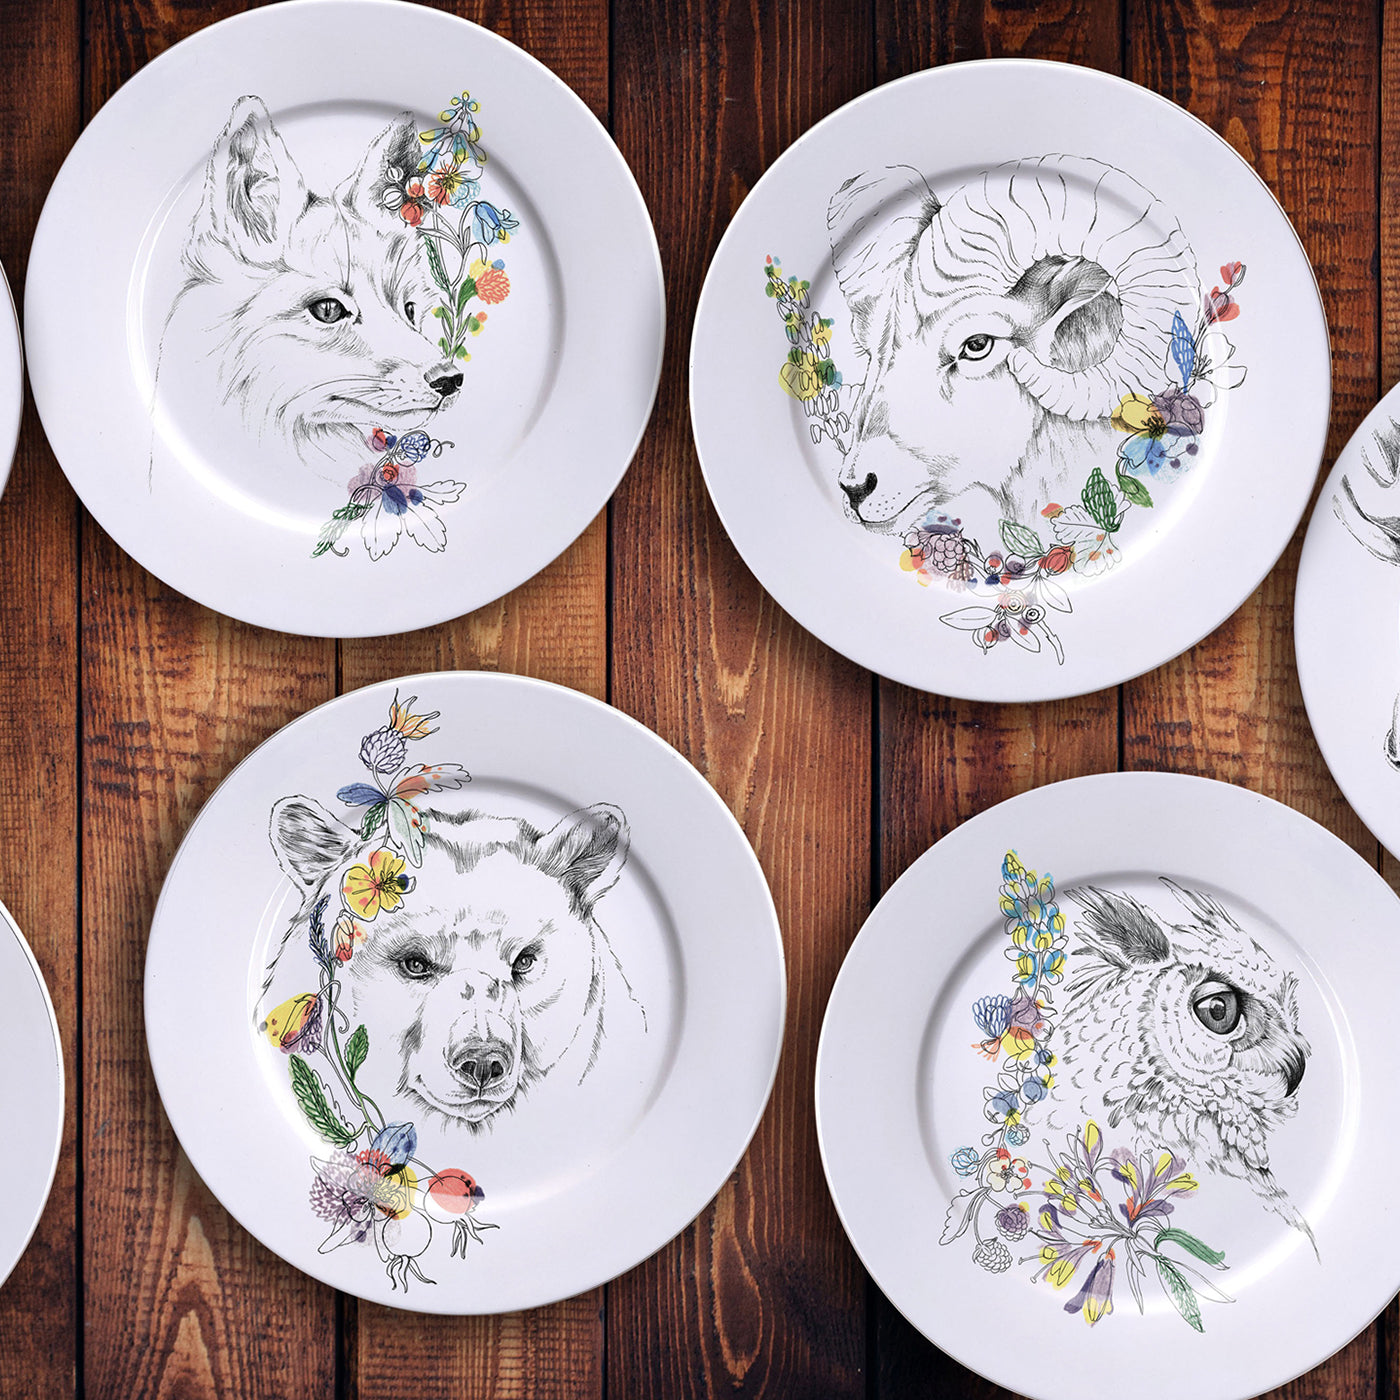 An Ode To The Woods Big Horn Sheep Dinner Plate - Alternative view 3